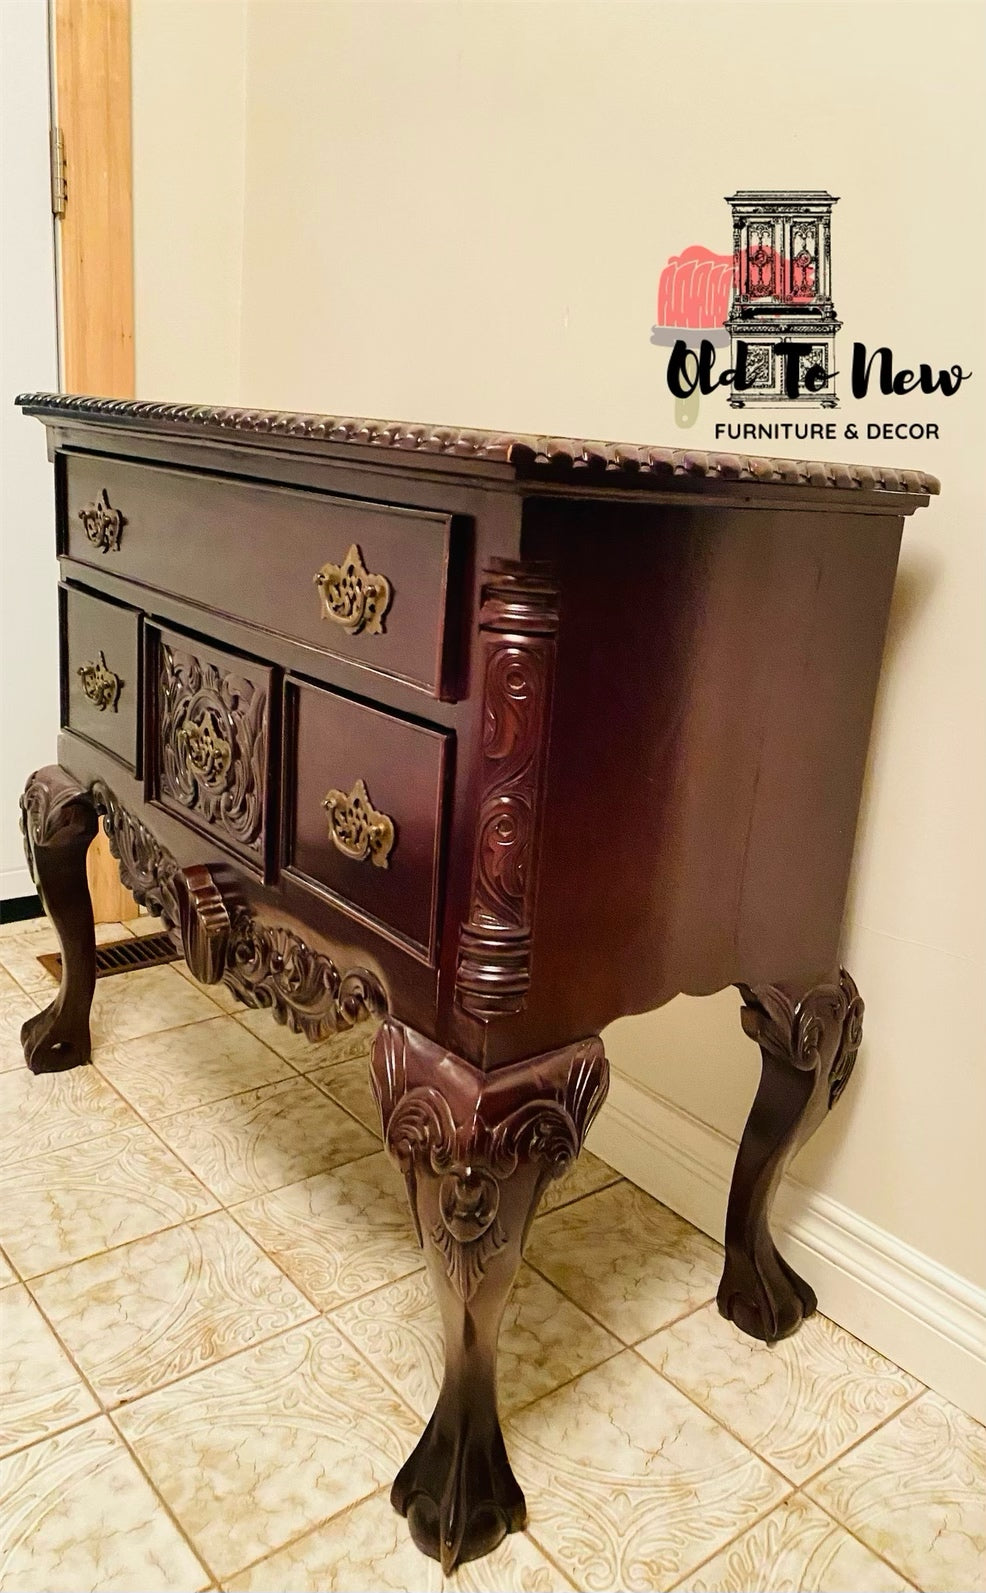 Stunning Antique Wood Furniture Available for Purchase; Choose Paint Color and Customize This Compact Sideboard Entryway Storage Unit.